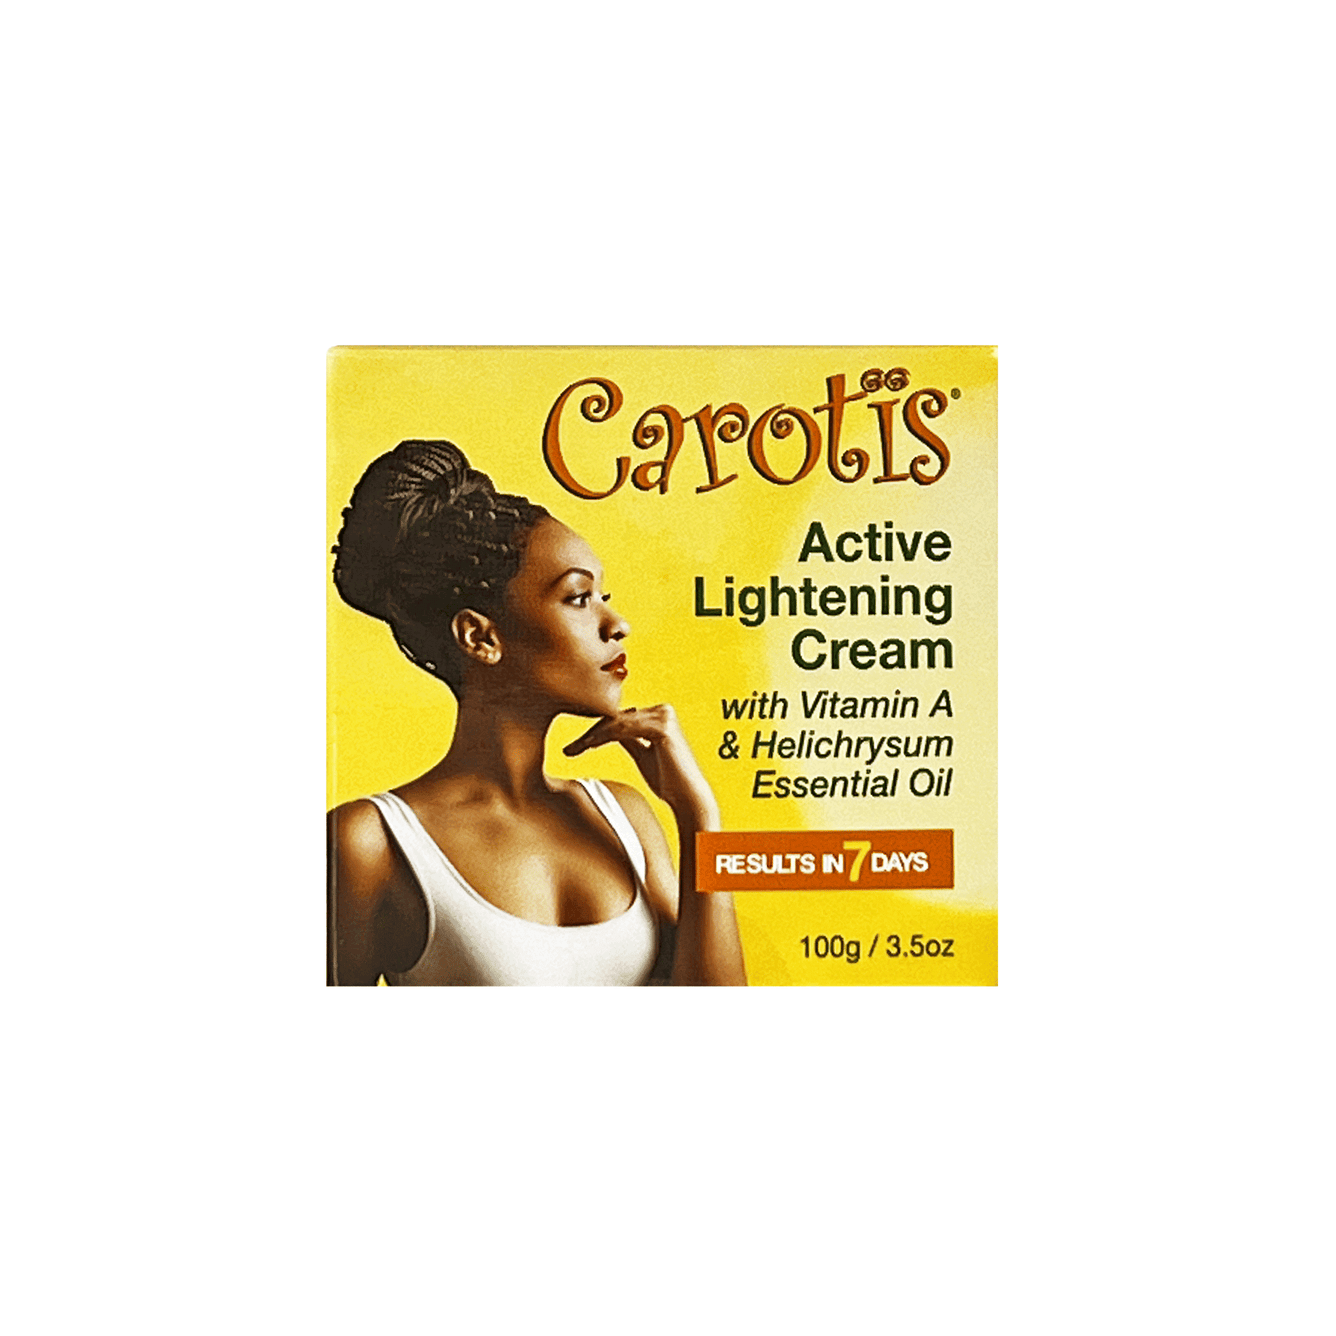 Carotis 100ml Active Lightening cream - 4.4 Fl oz / 100ml - with Vitamin A and Carrot Oil Mitchell Brands - Mitchell Brands - Skin Lightening, Skin Brightening, Fade Dark Spots, Shea Butter, Hair Growth Products